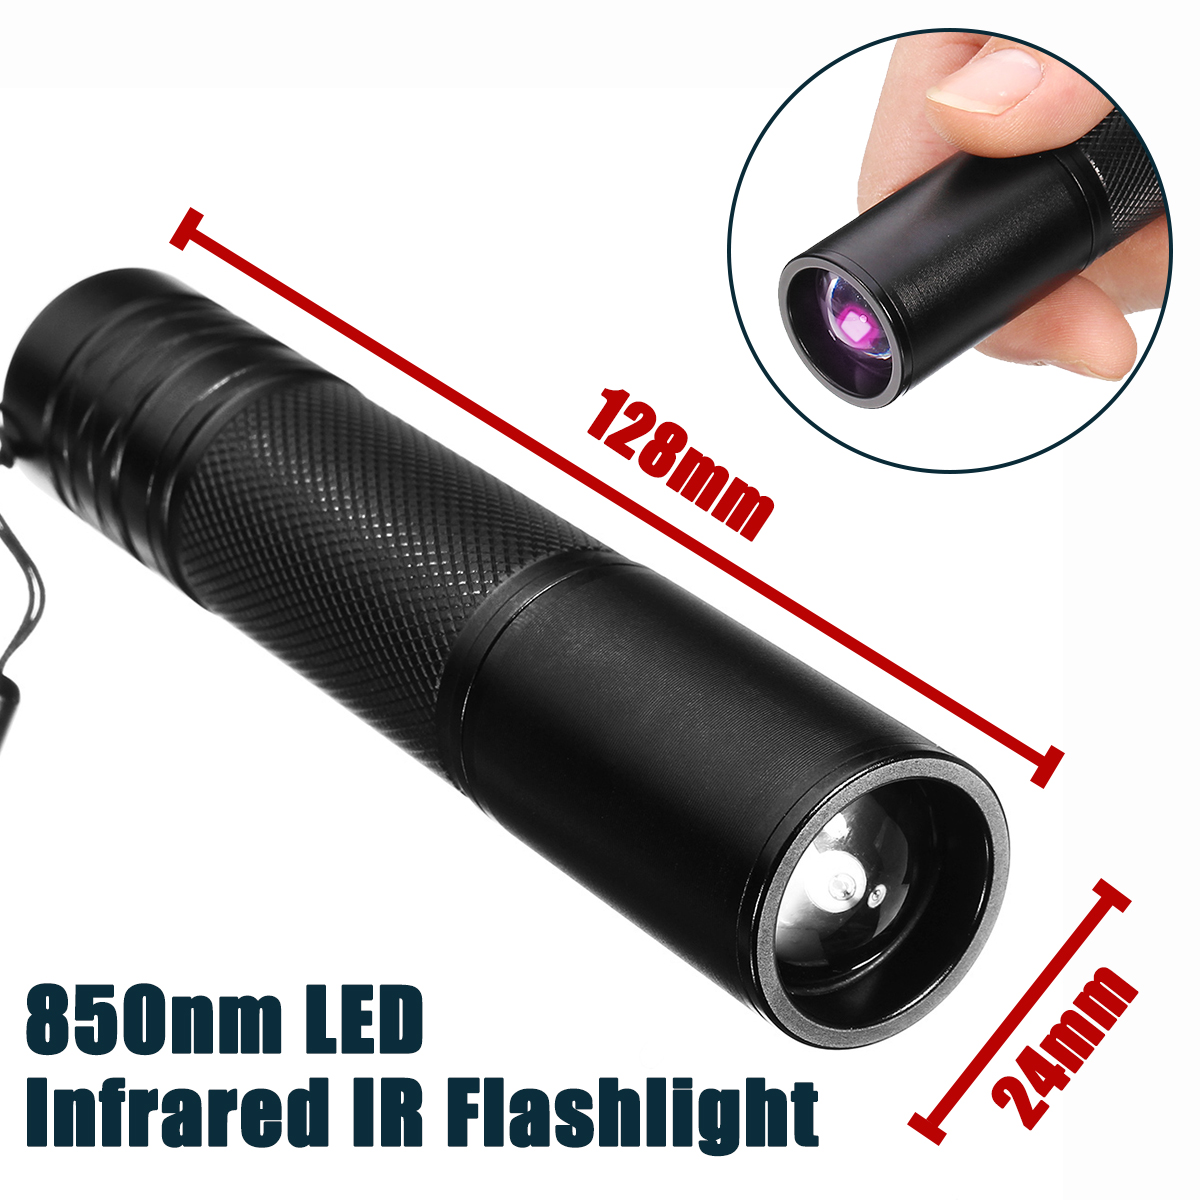 5W-850nm-Infrared-IR-LED--Flashlight-Zoomable-Night-Vision-Scope-Outdoor-Torch-1243342